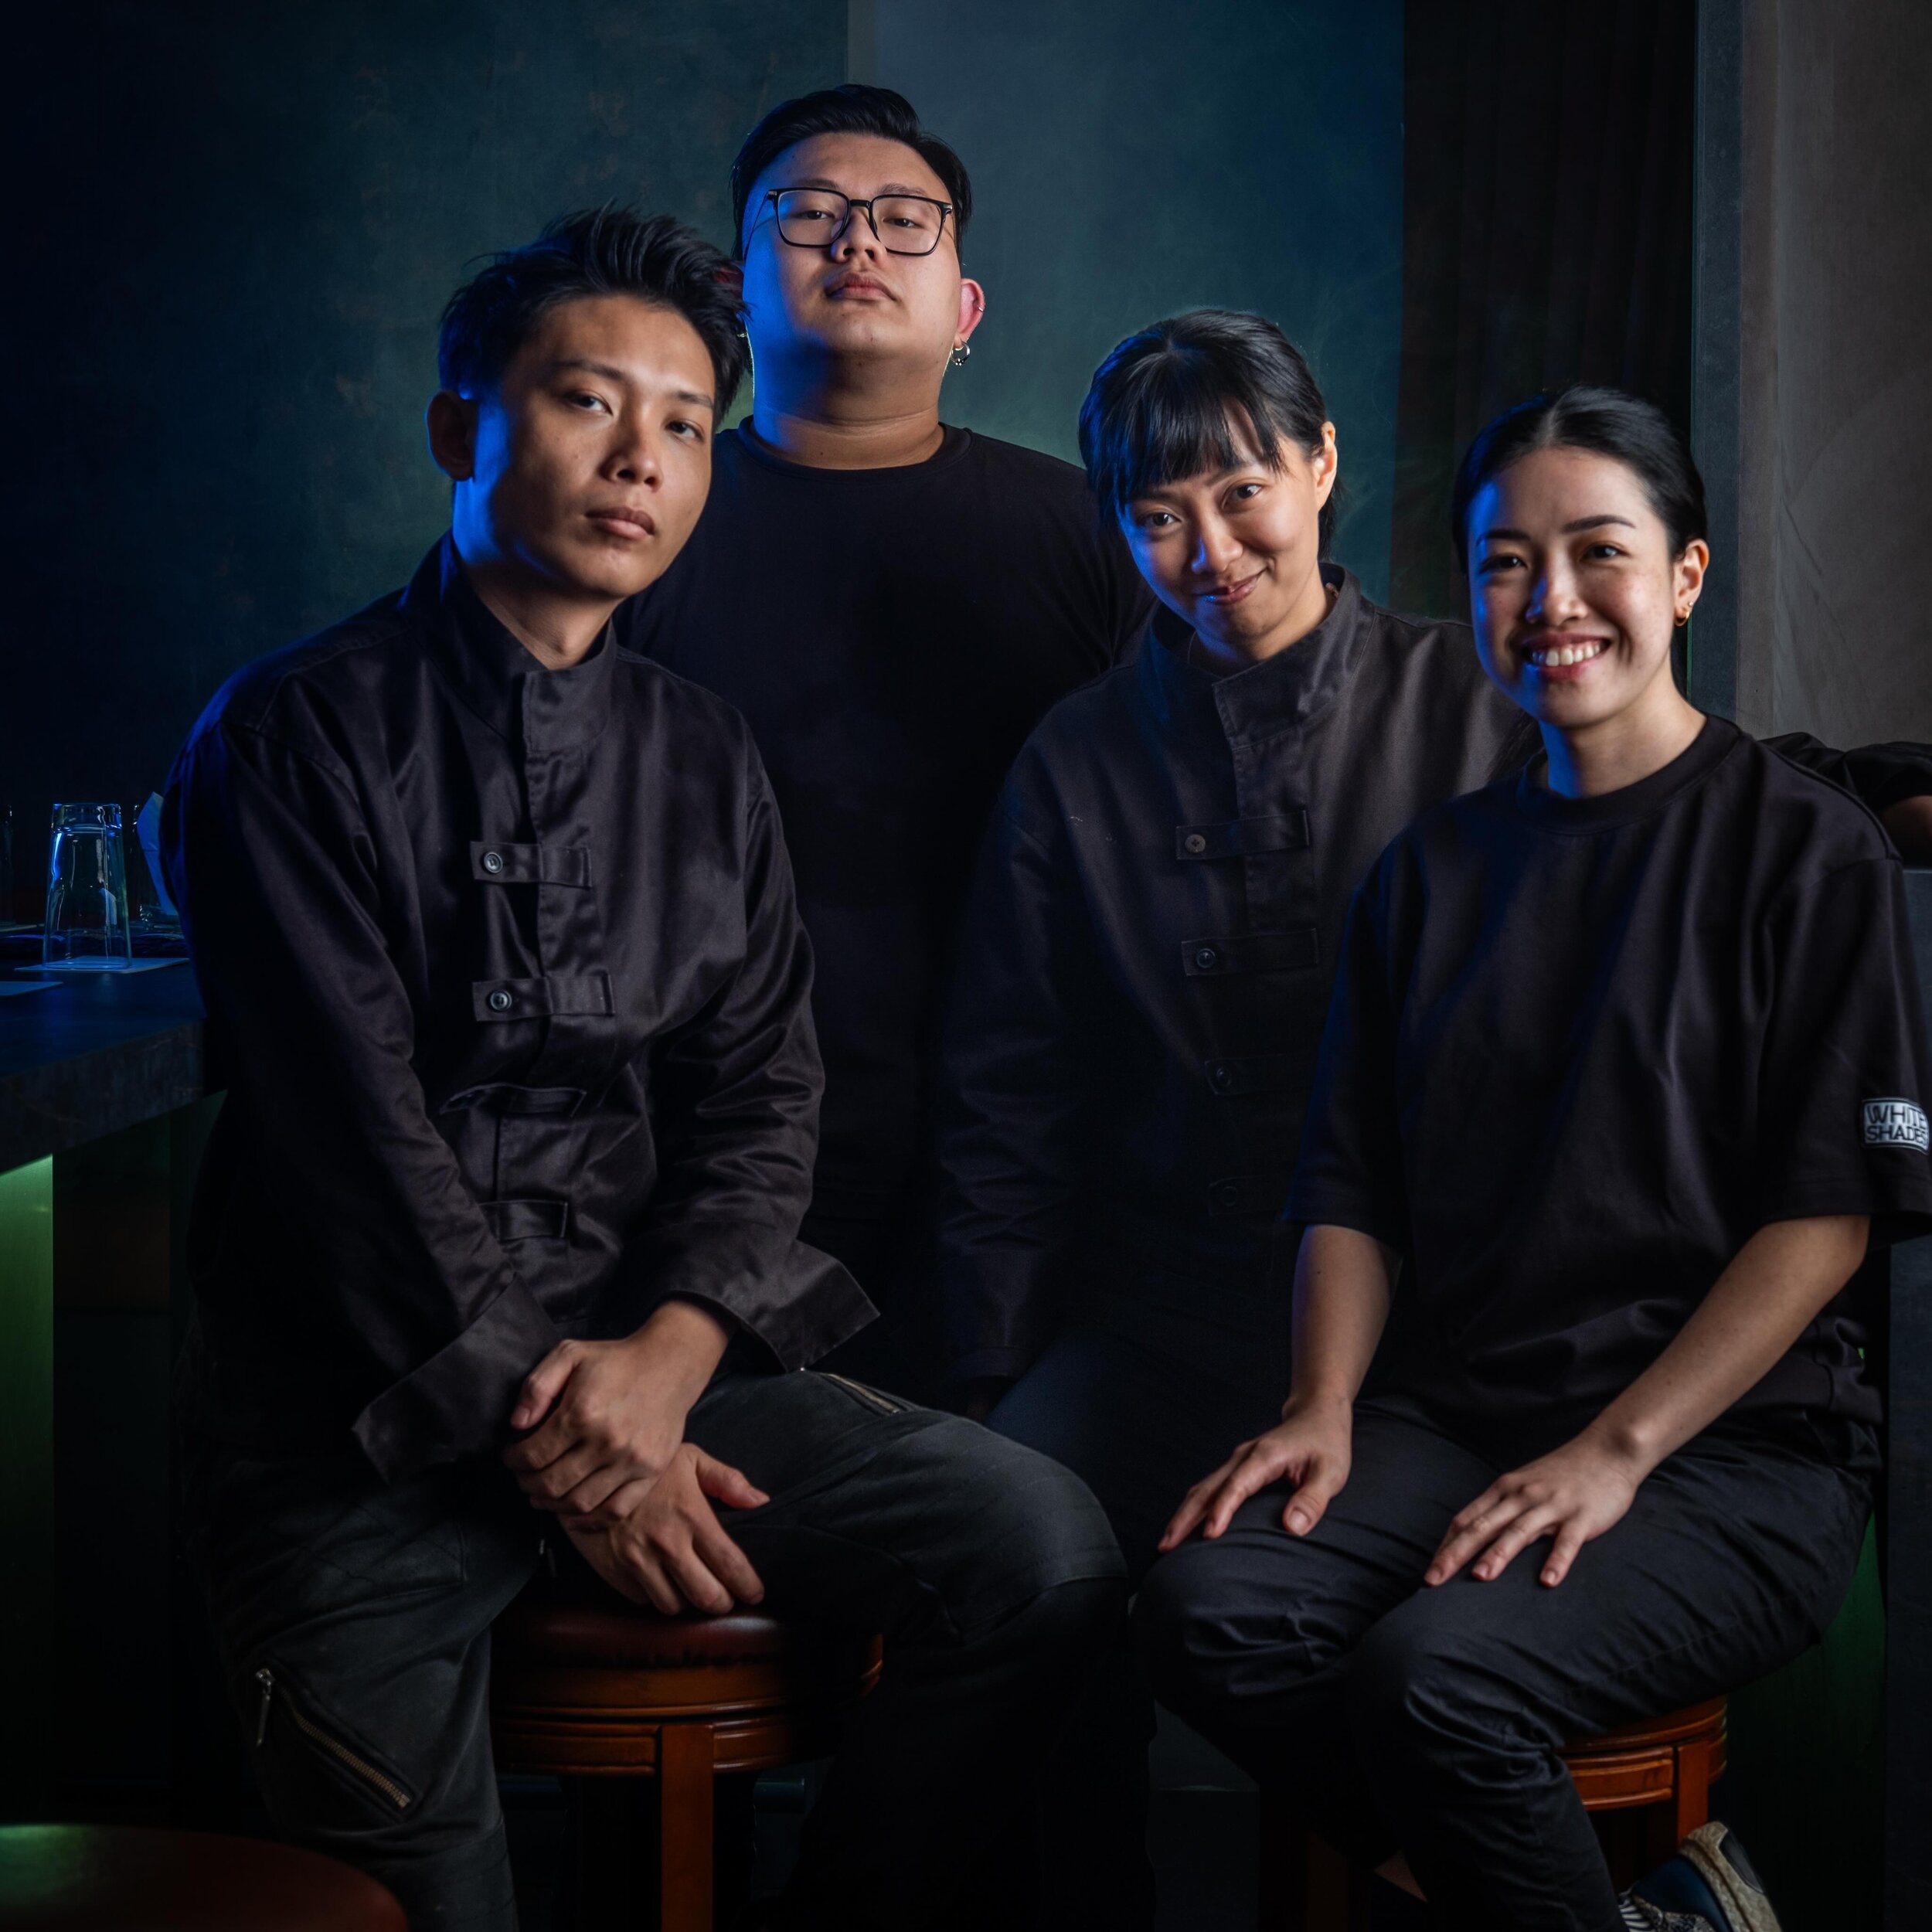 &ldquo;🍸✨ Meet the bar team of White Shades: The Four Horsemen 🐎🍹 Stirring up magic behind the bar, this gang will make sure you have a great time with us! 

 #WhiteShadesSG #Cocktails #Event #Rooftop #Restaurants #SGBars &nbsp;#SGCocktails &nbsp;